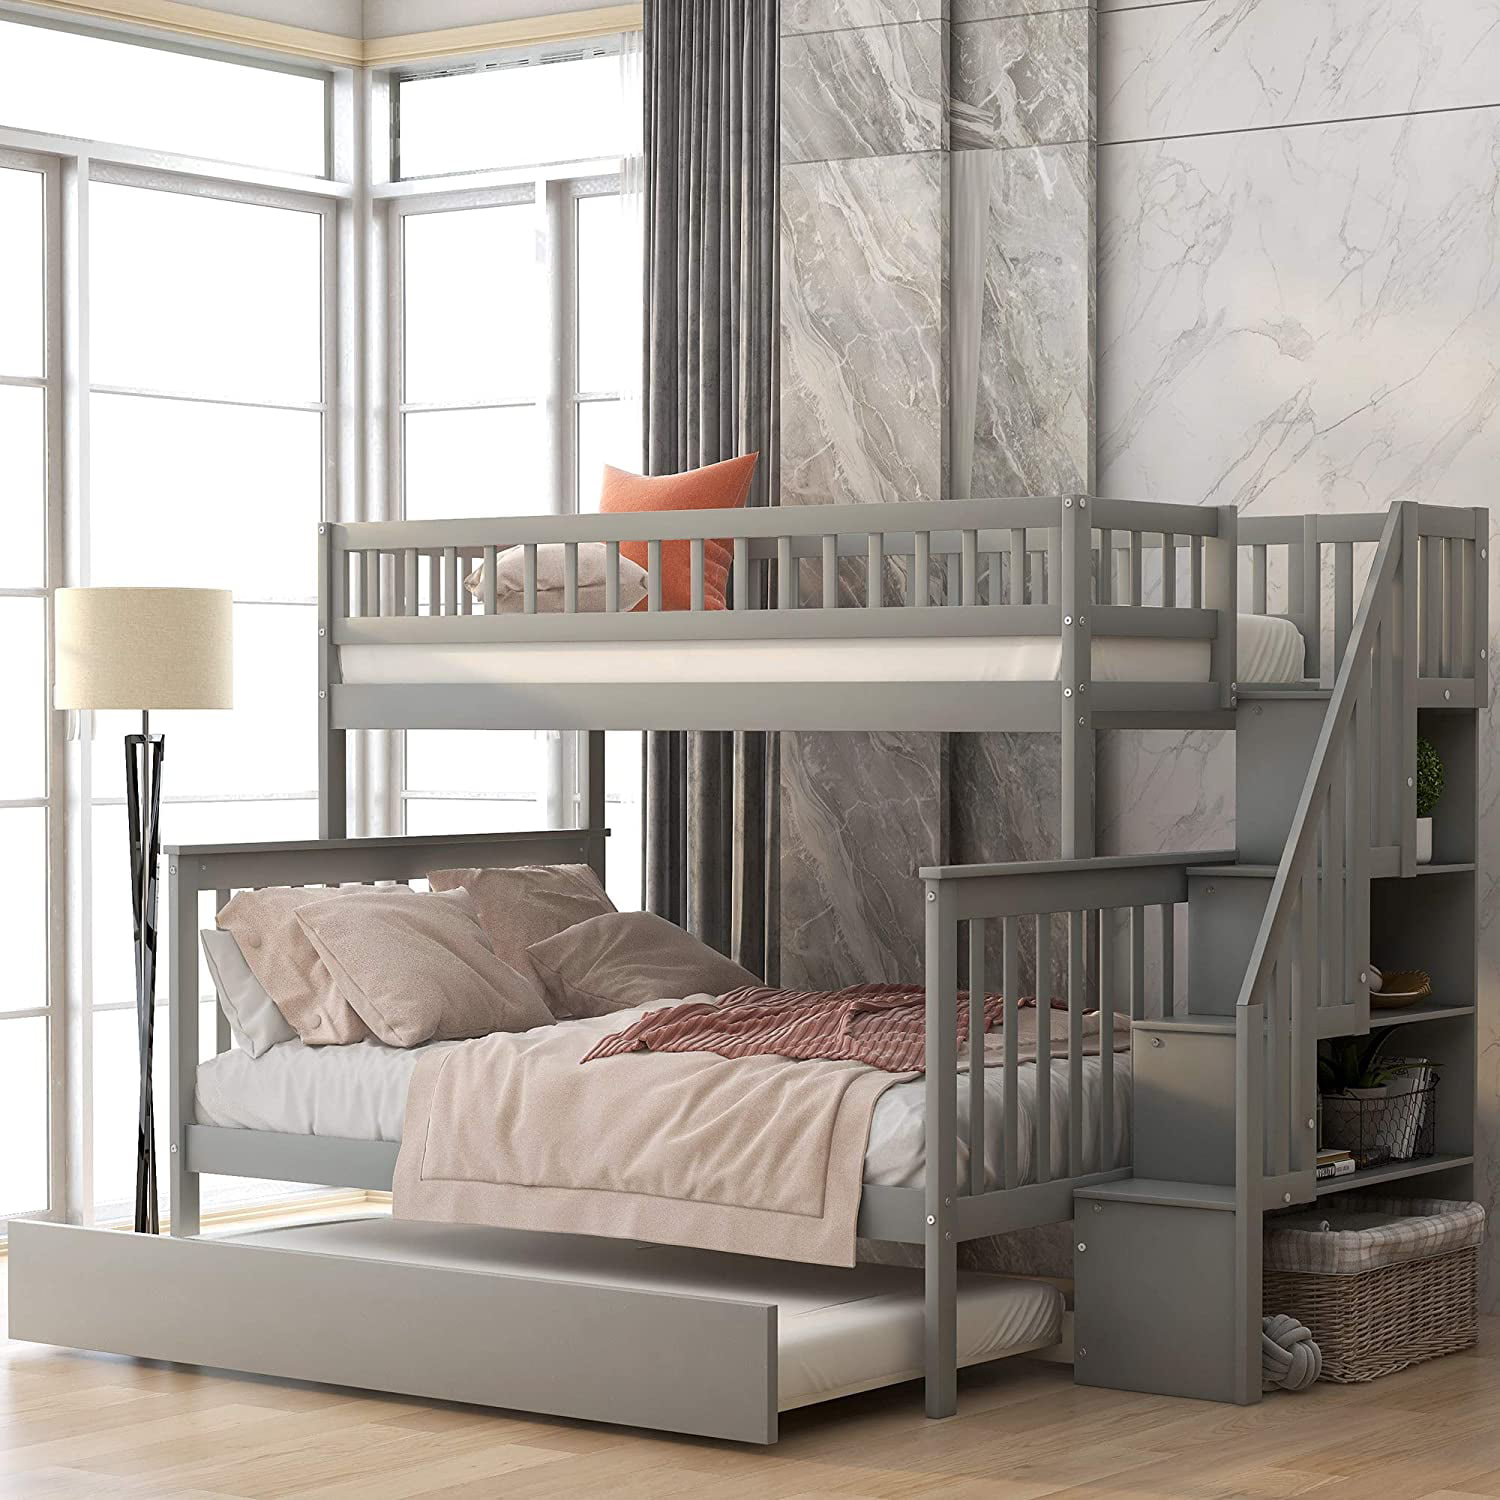 Piscis Bunk Bed Beds Twin Over, Boys Full Size Bed Frame